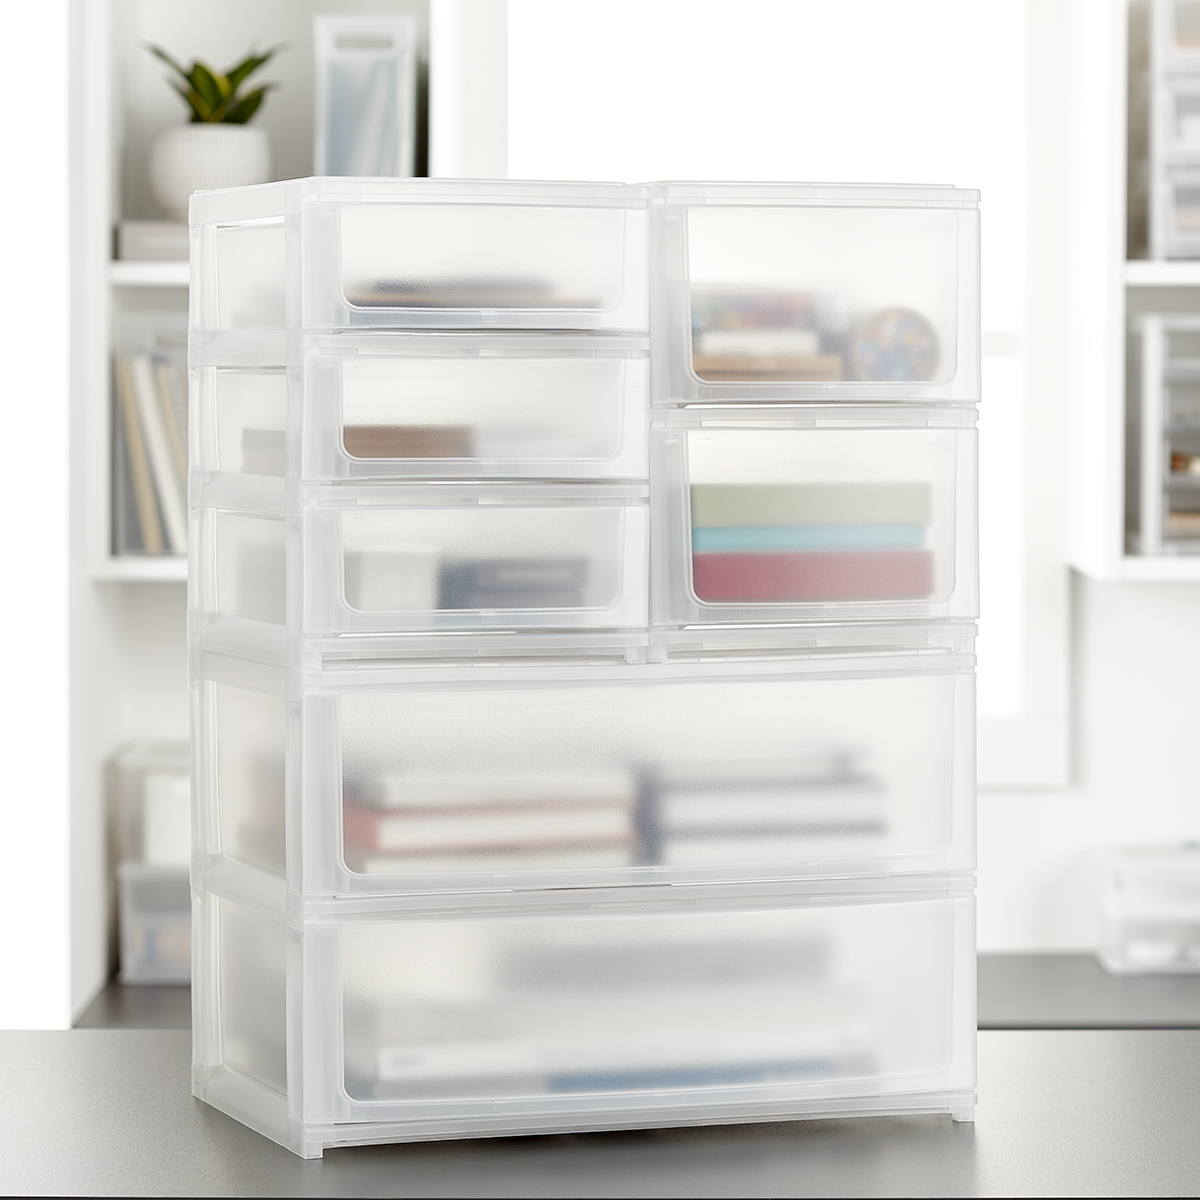 Medium Like-it Stacking Drawer, Translucent, 20.5″ x 12.5″ x 8″ – Find  Organizers That Fit